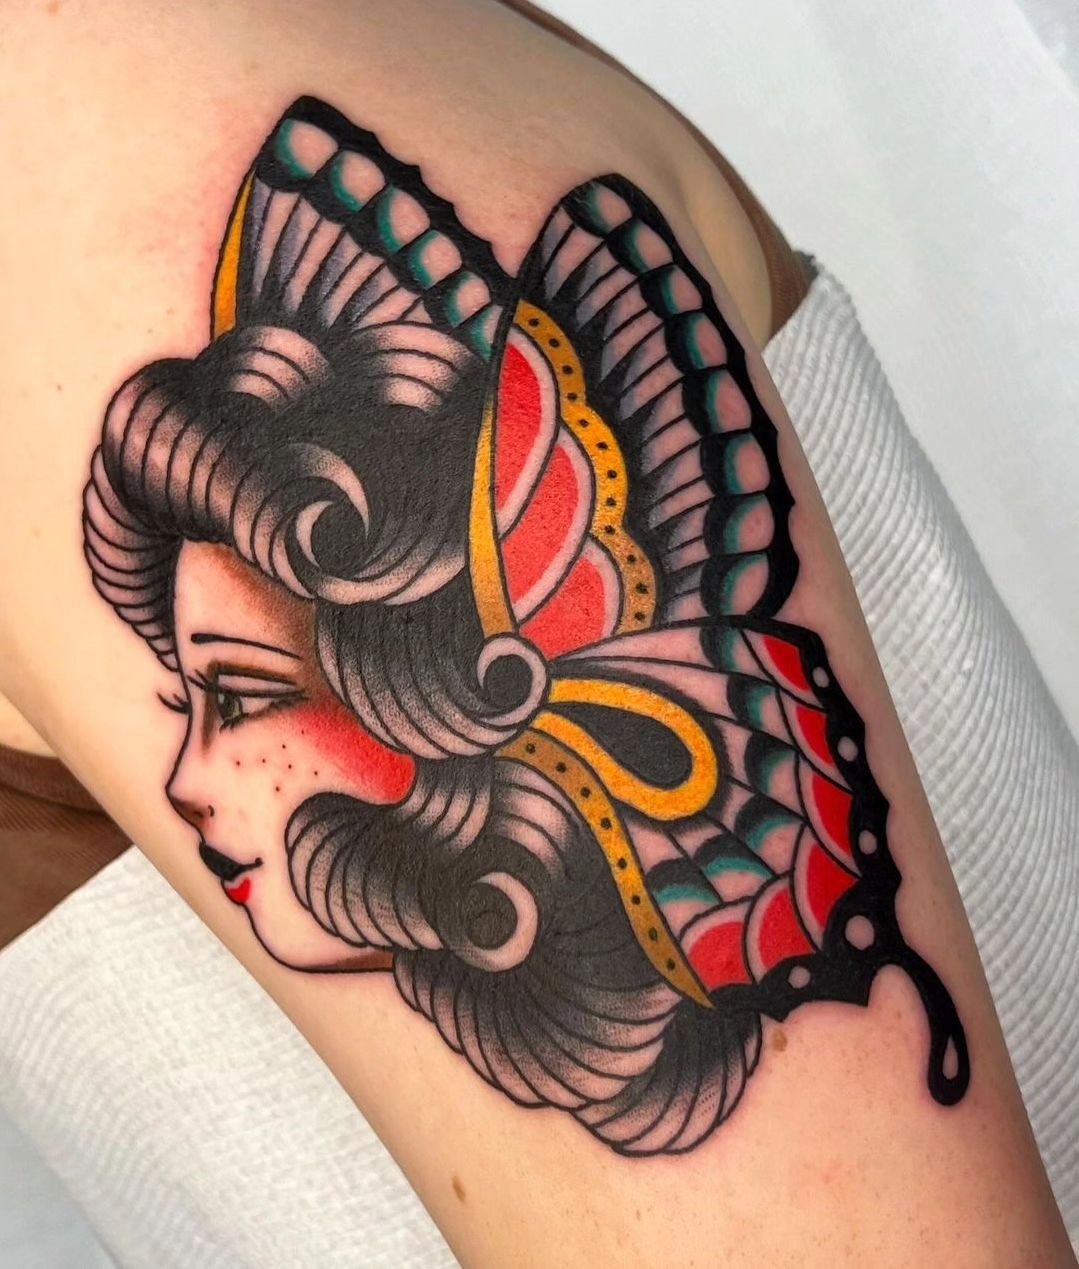 Beautiful Butterfly Lady by @jospasarotattoo

To book with Jo, email her at jospasarotattoo@gmail.com or contact the shop